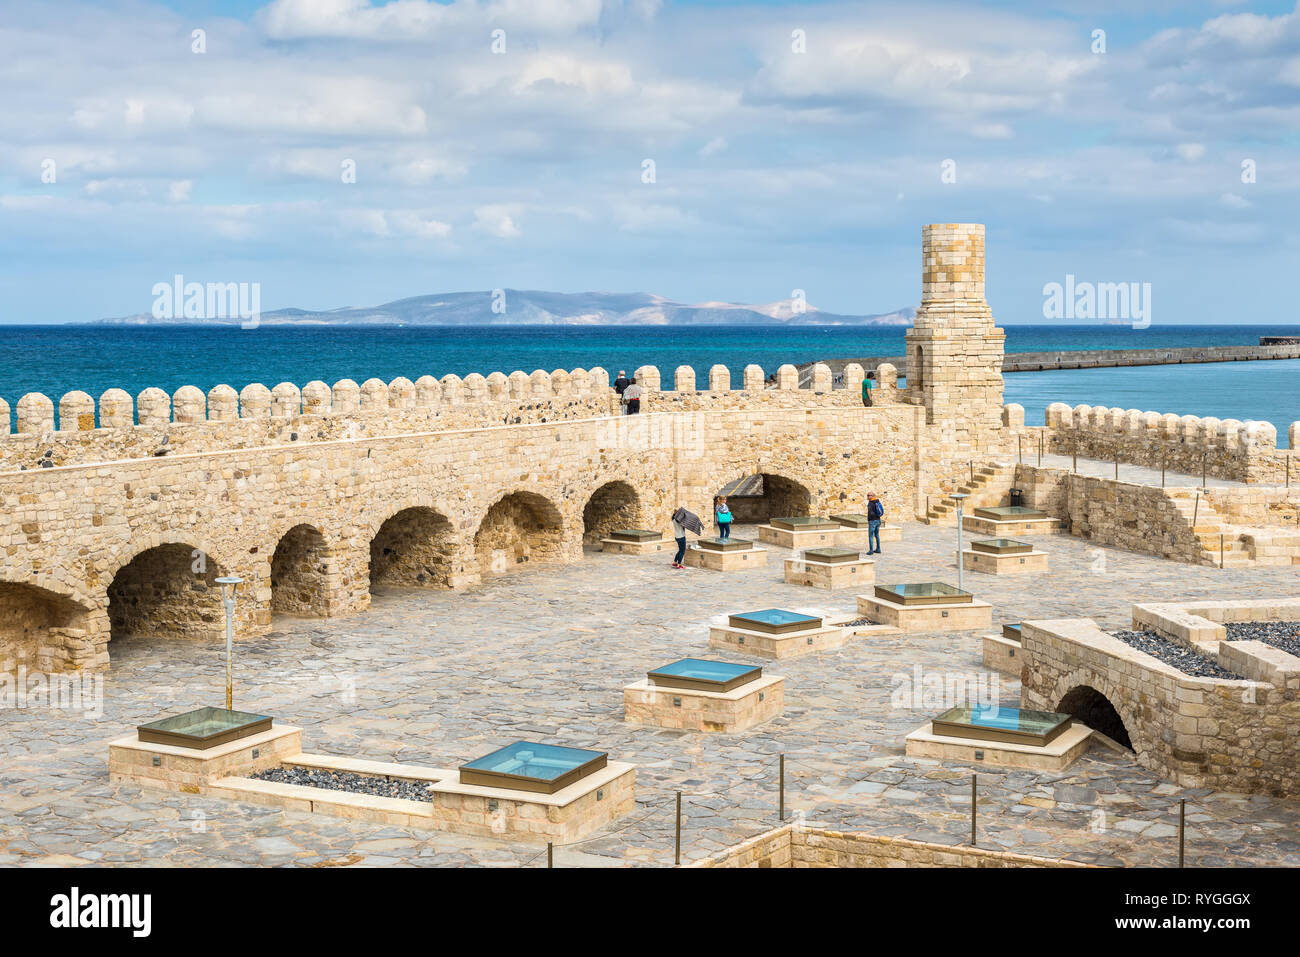 Heraklion, Crete, Greece - November 2, 2017: Rooftop view of the old venetian fortress Koules at the port of Heraklion, Crete, Greece. Stock Photo